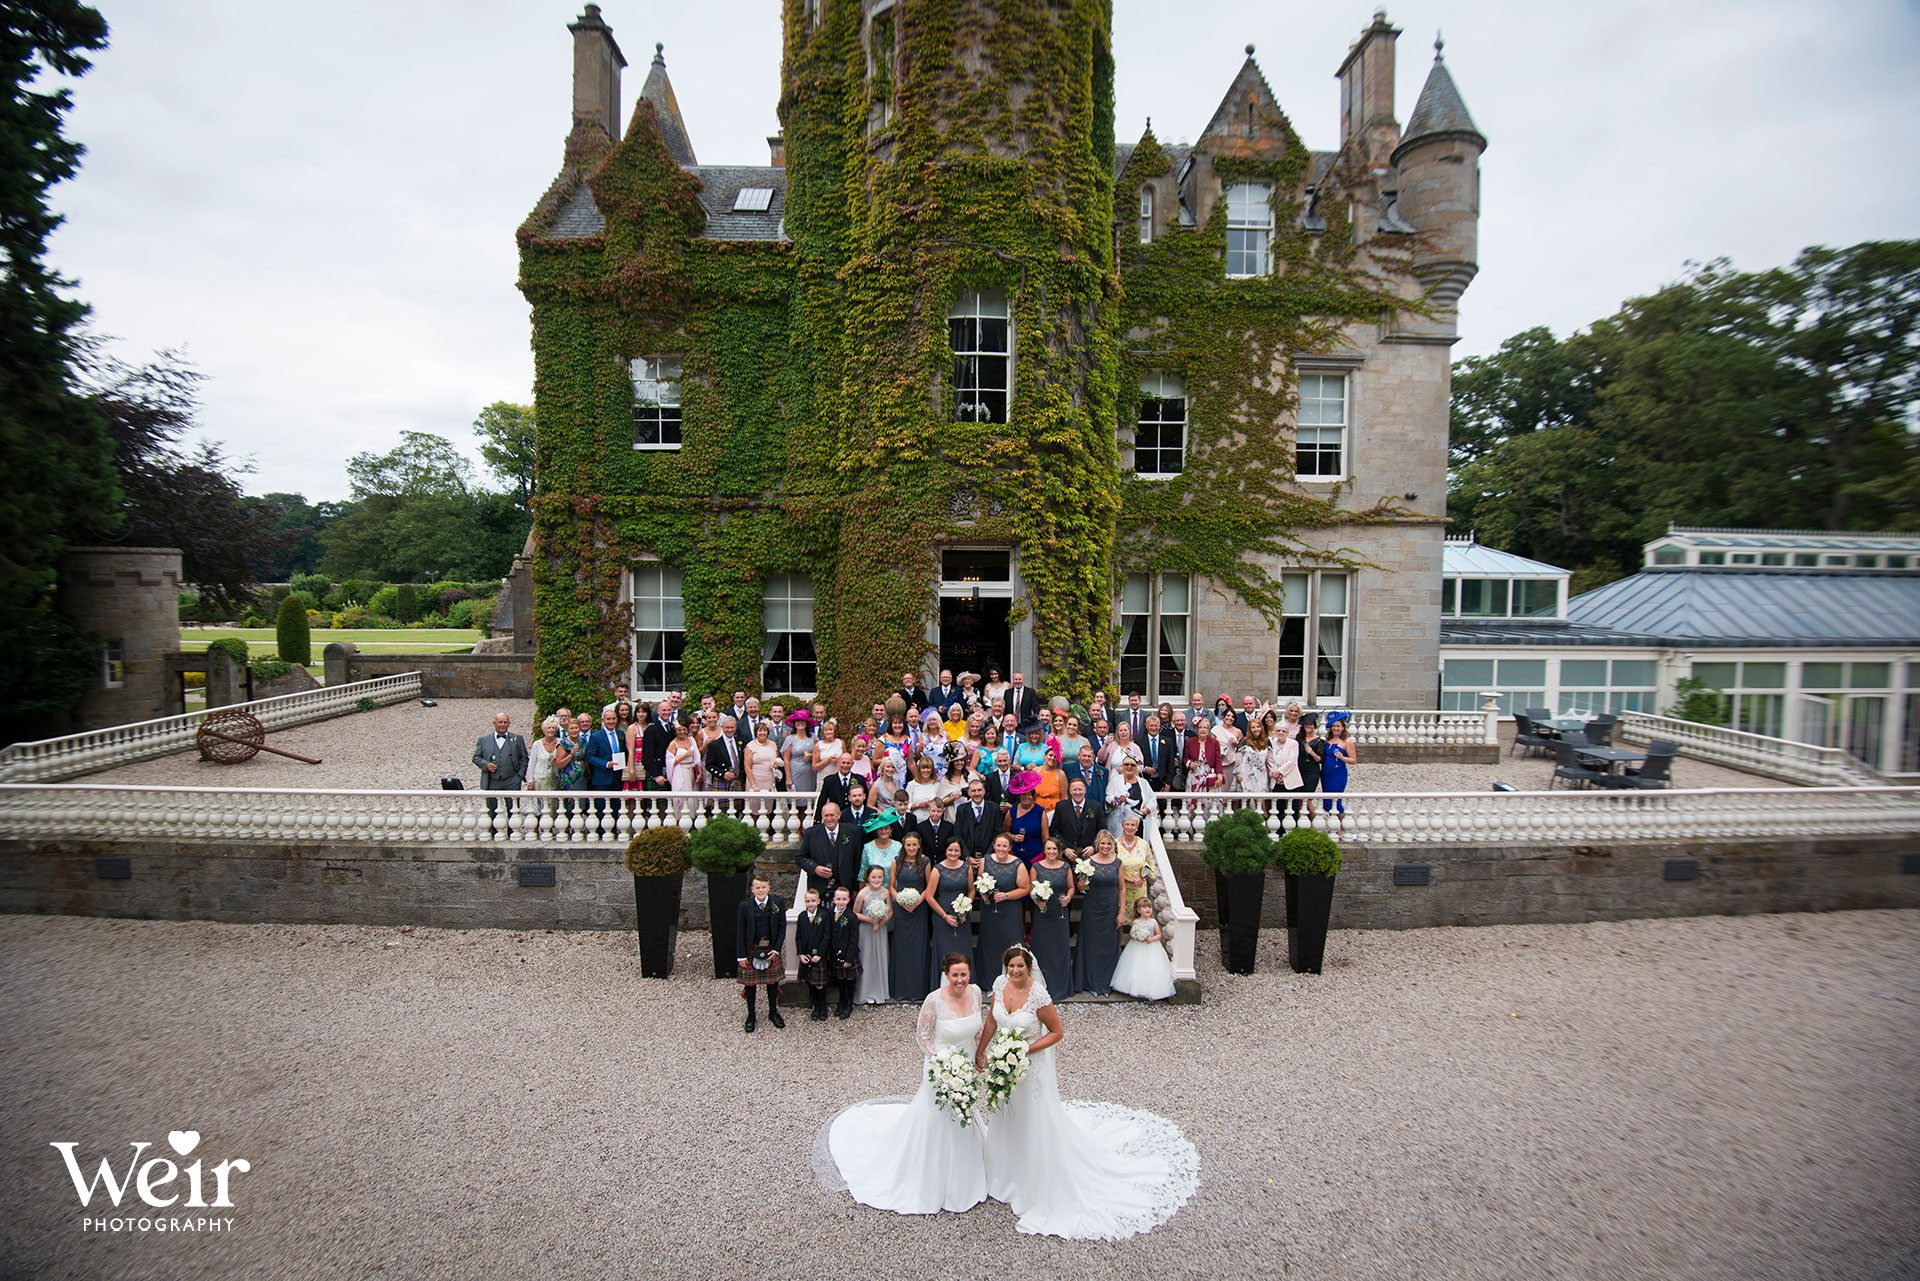 Group photo in front of Carlowrie Castle